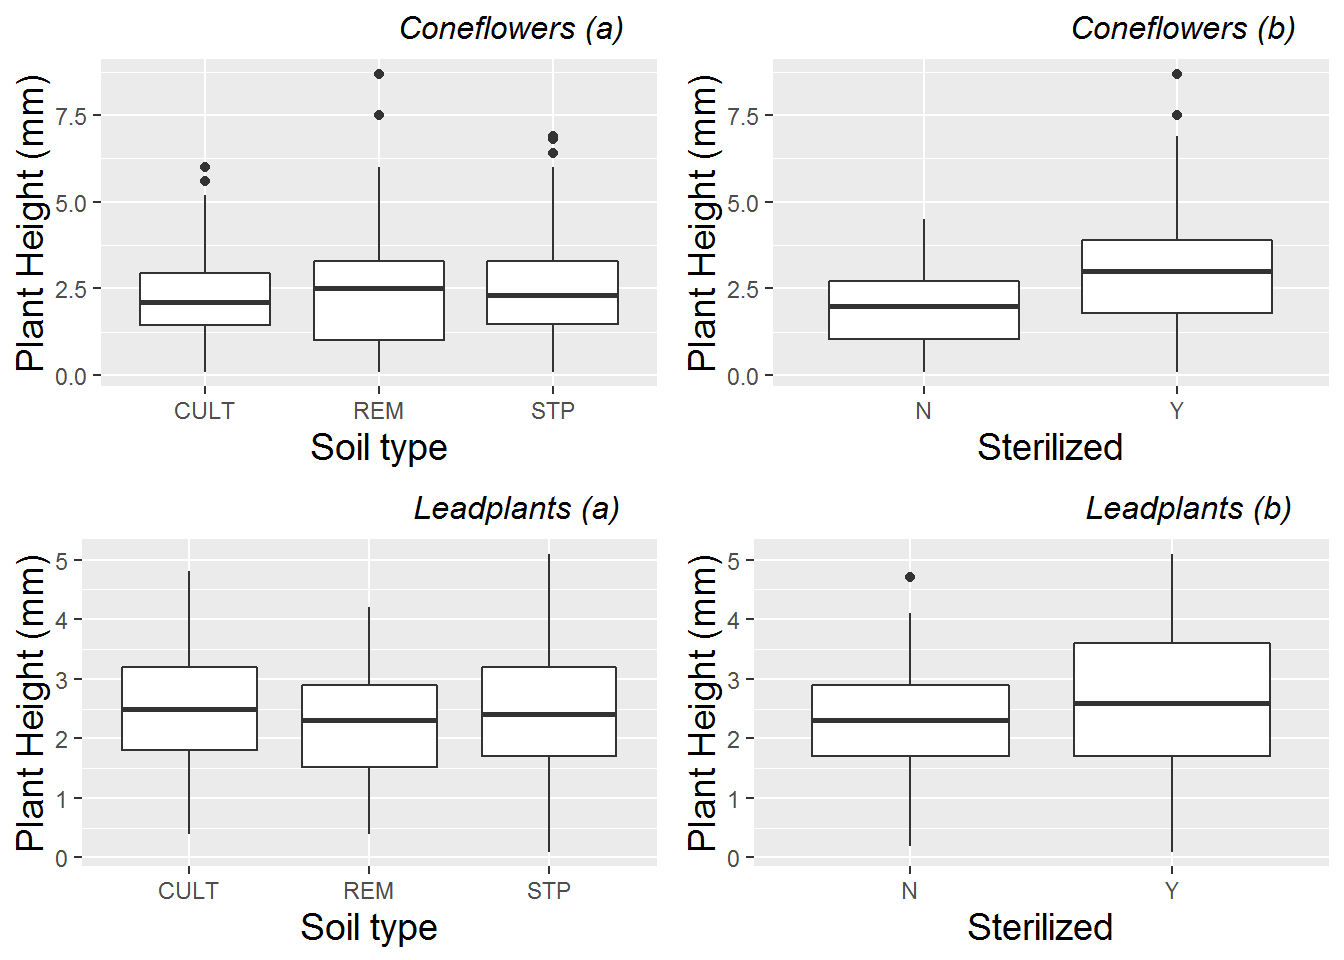 Plant height comparisons of (a) soil type and (b) sterilization within species.  Each plant is represented by the mean height over all measurements at all time points for that plant.